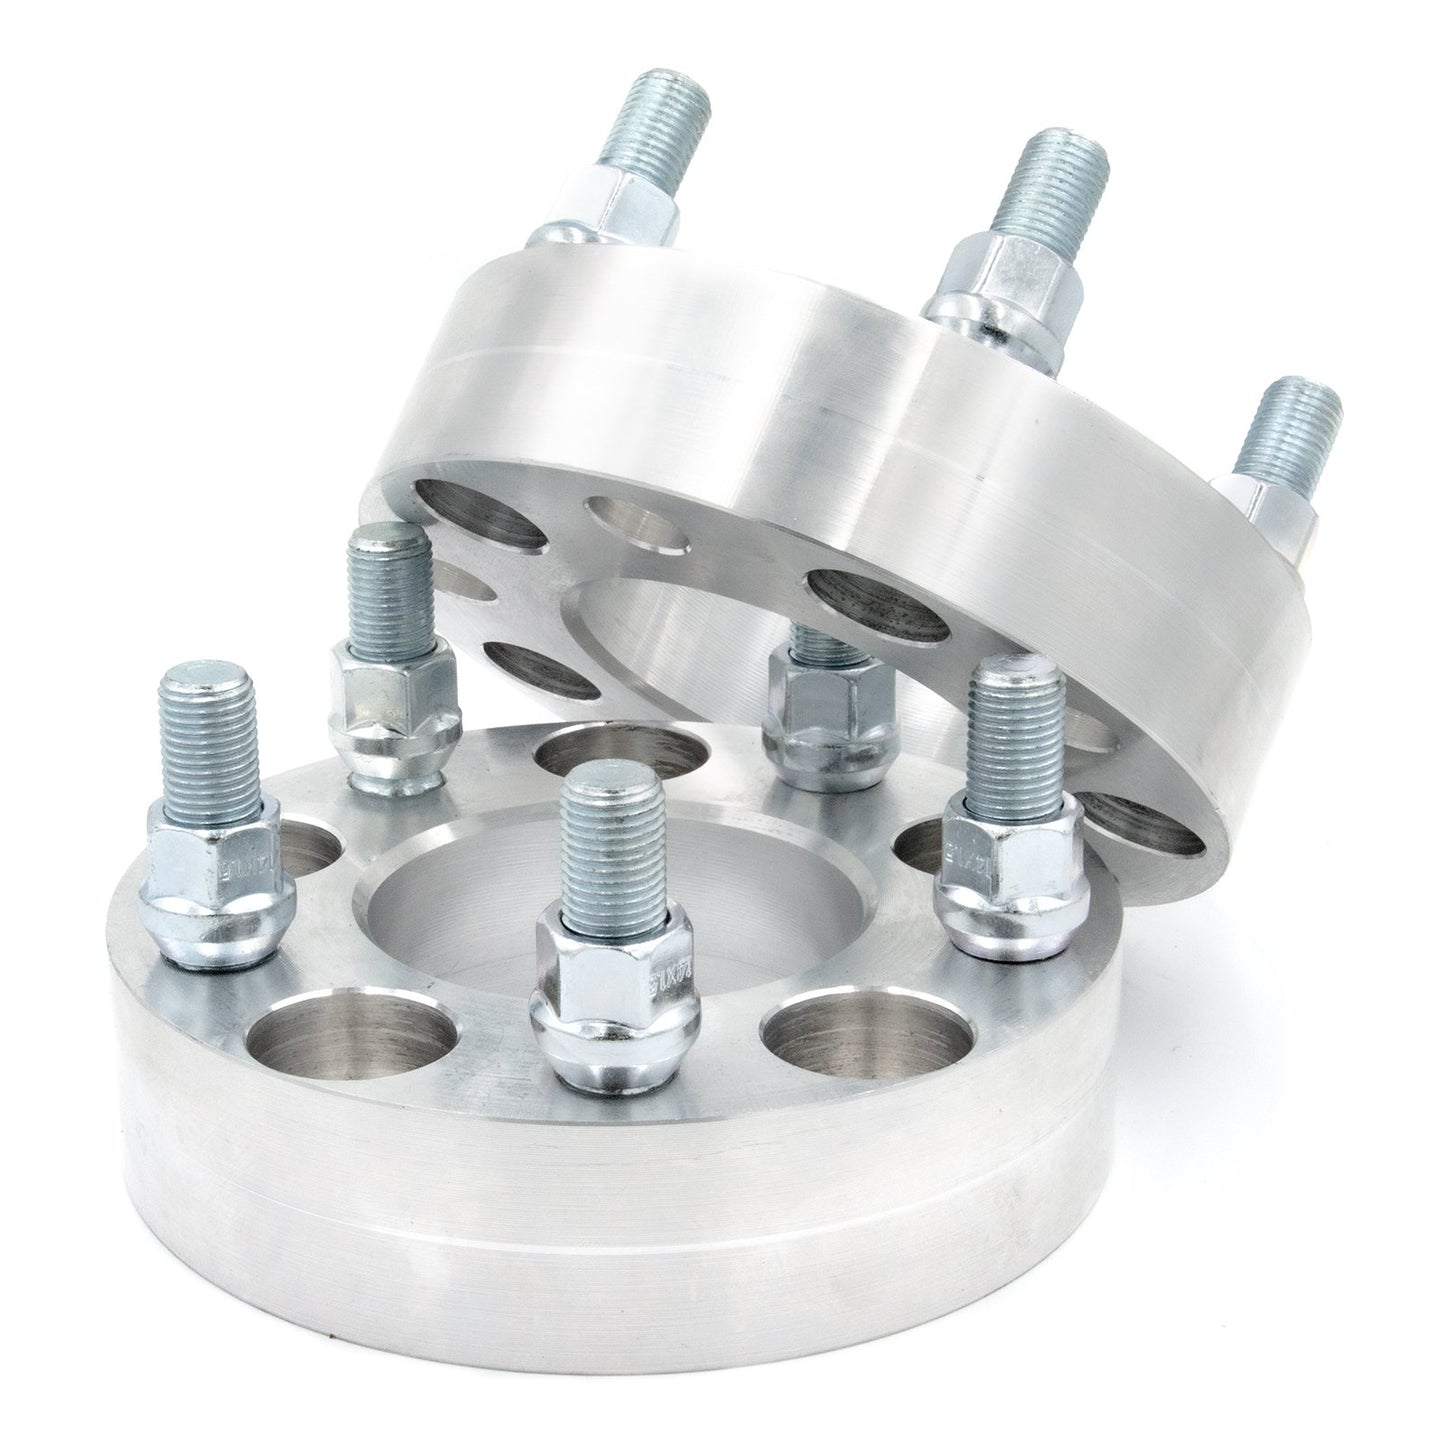 5x130 to 5x130 Wheel Spacer/Adapter - Thickness: 3/4"- 4"